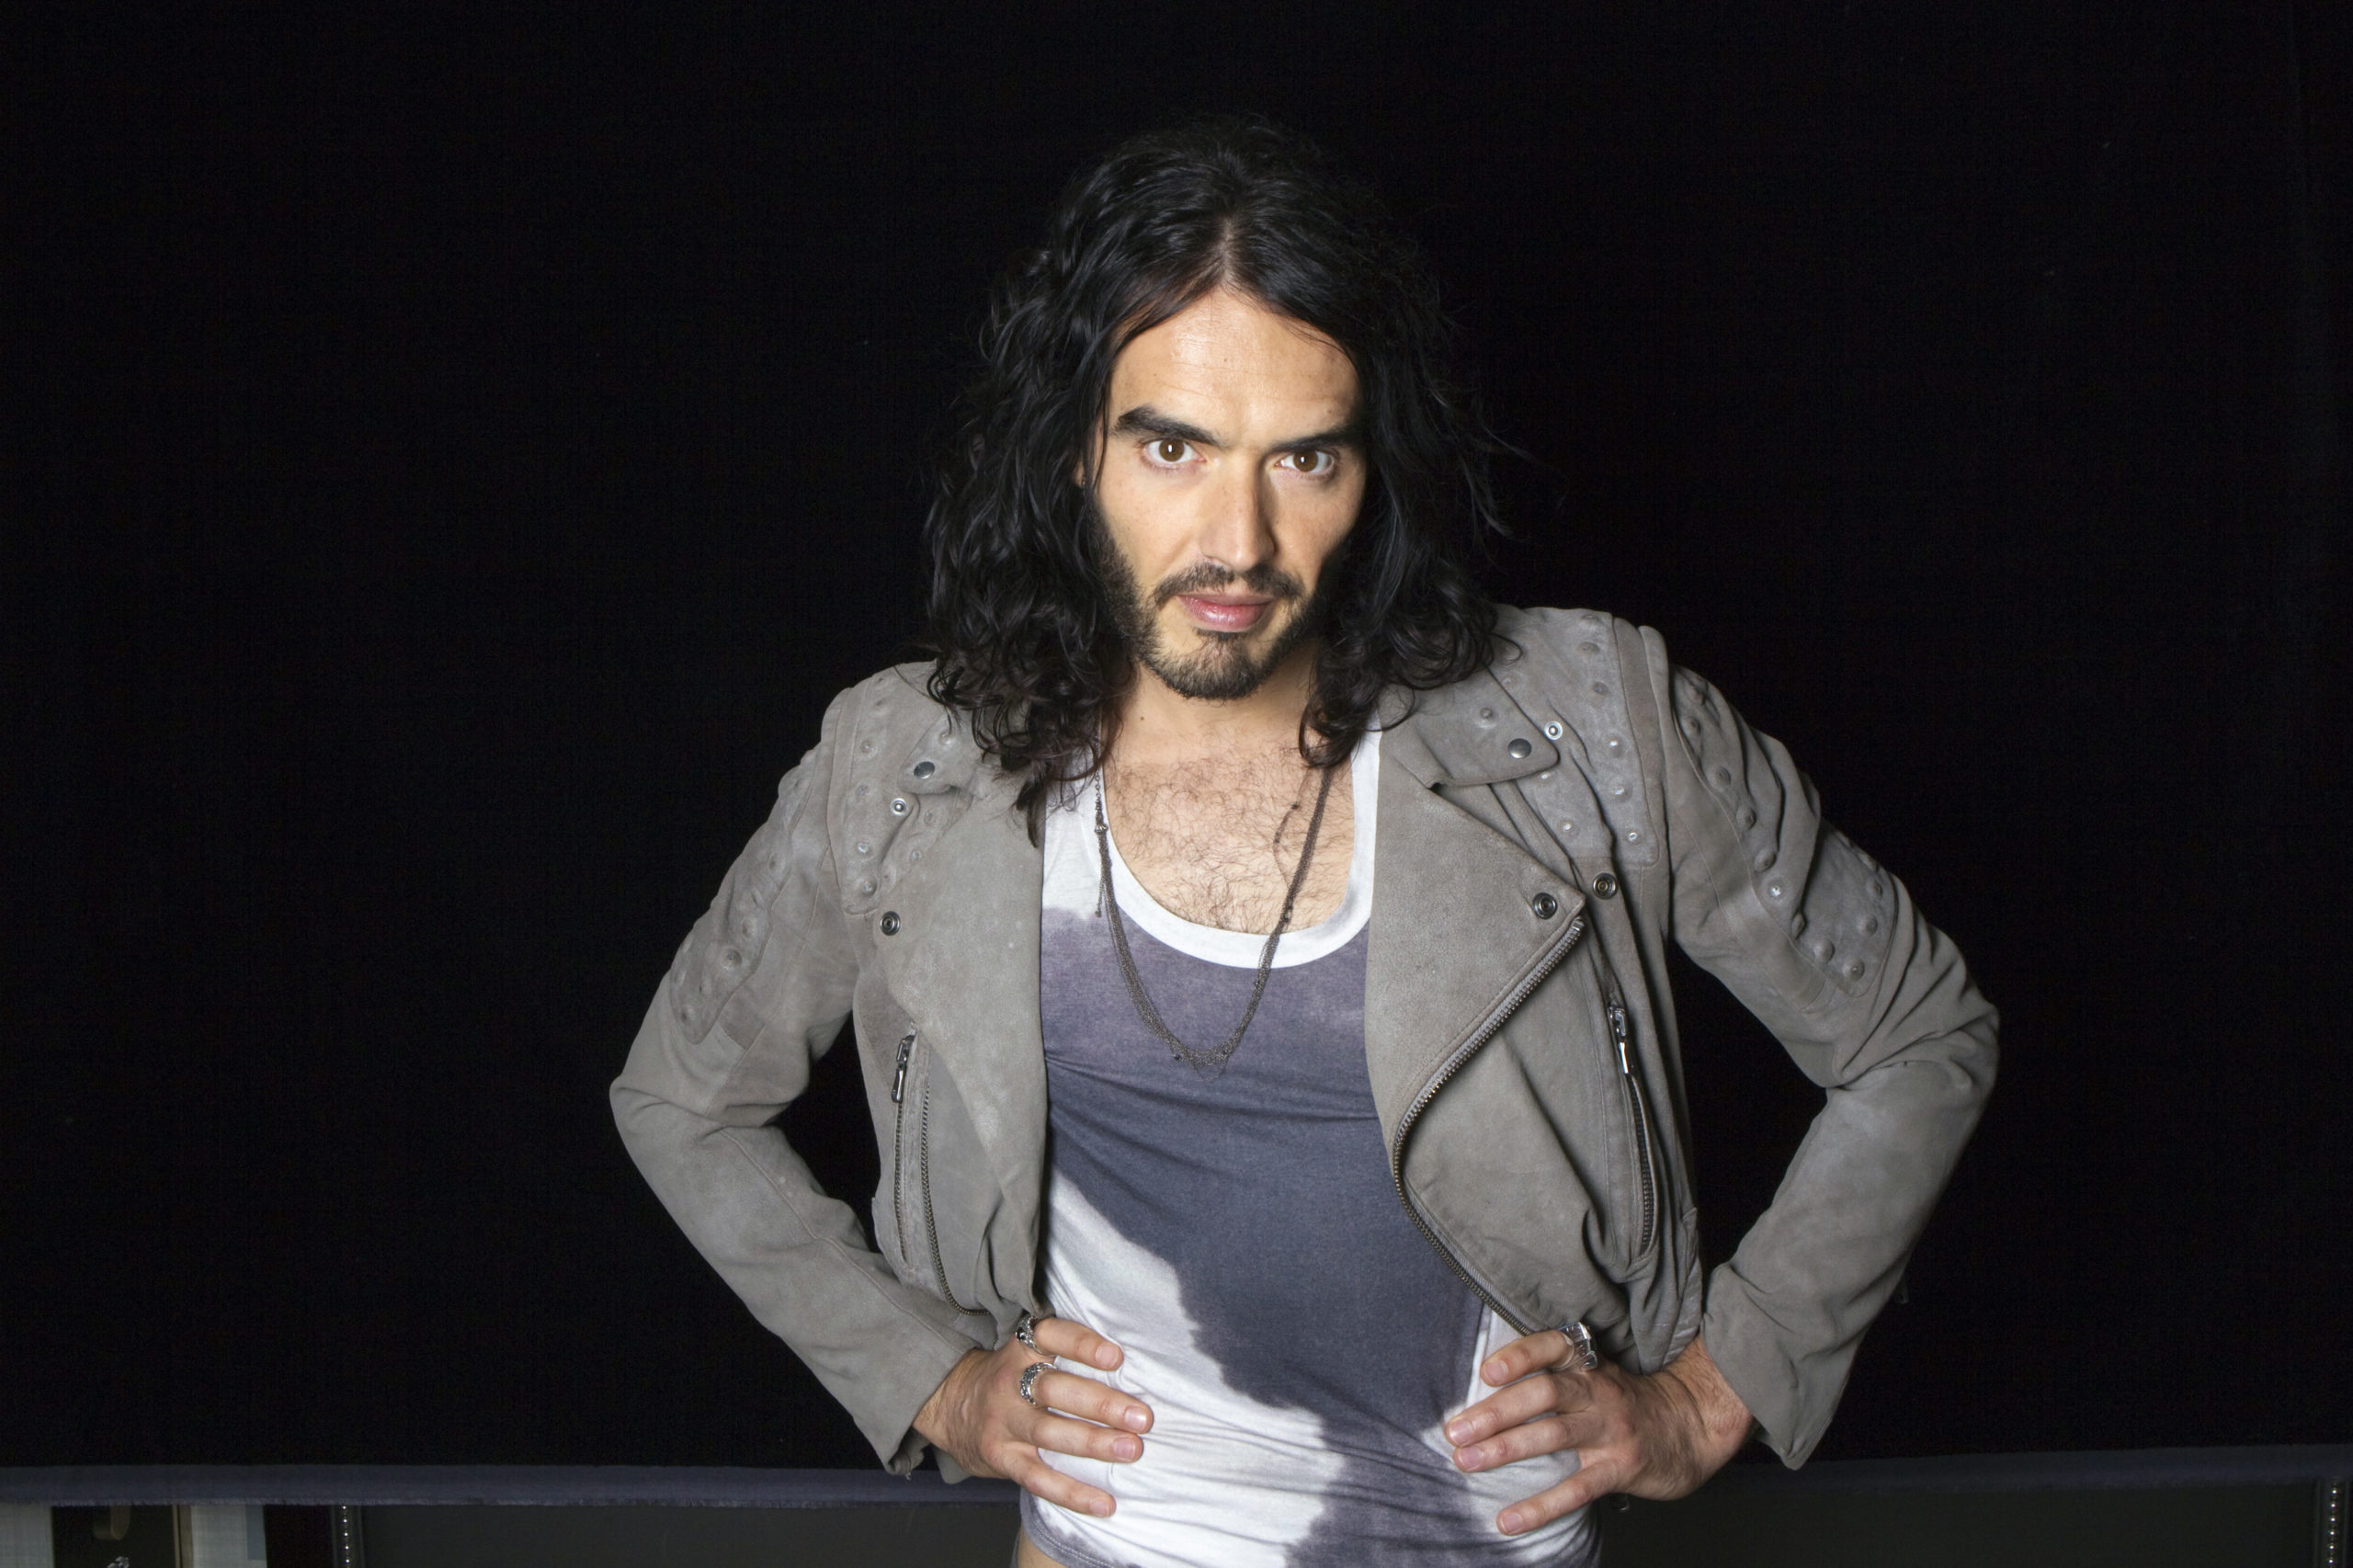 Actor Russell Brand poses for a portrait while promoting the film "Get Him to the Greek" in New York May 18, 2010. REUTERS/Lucas Jackson (UNITED STATES - Tags: ENTERTAINMENT PROFILE)